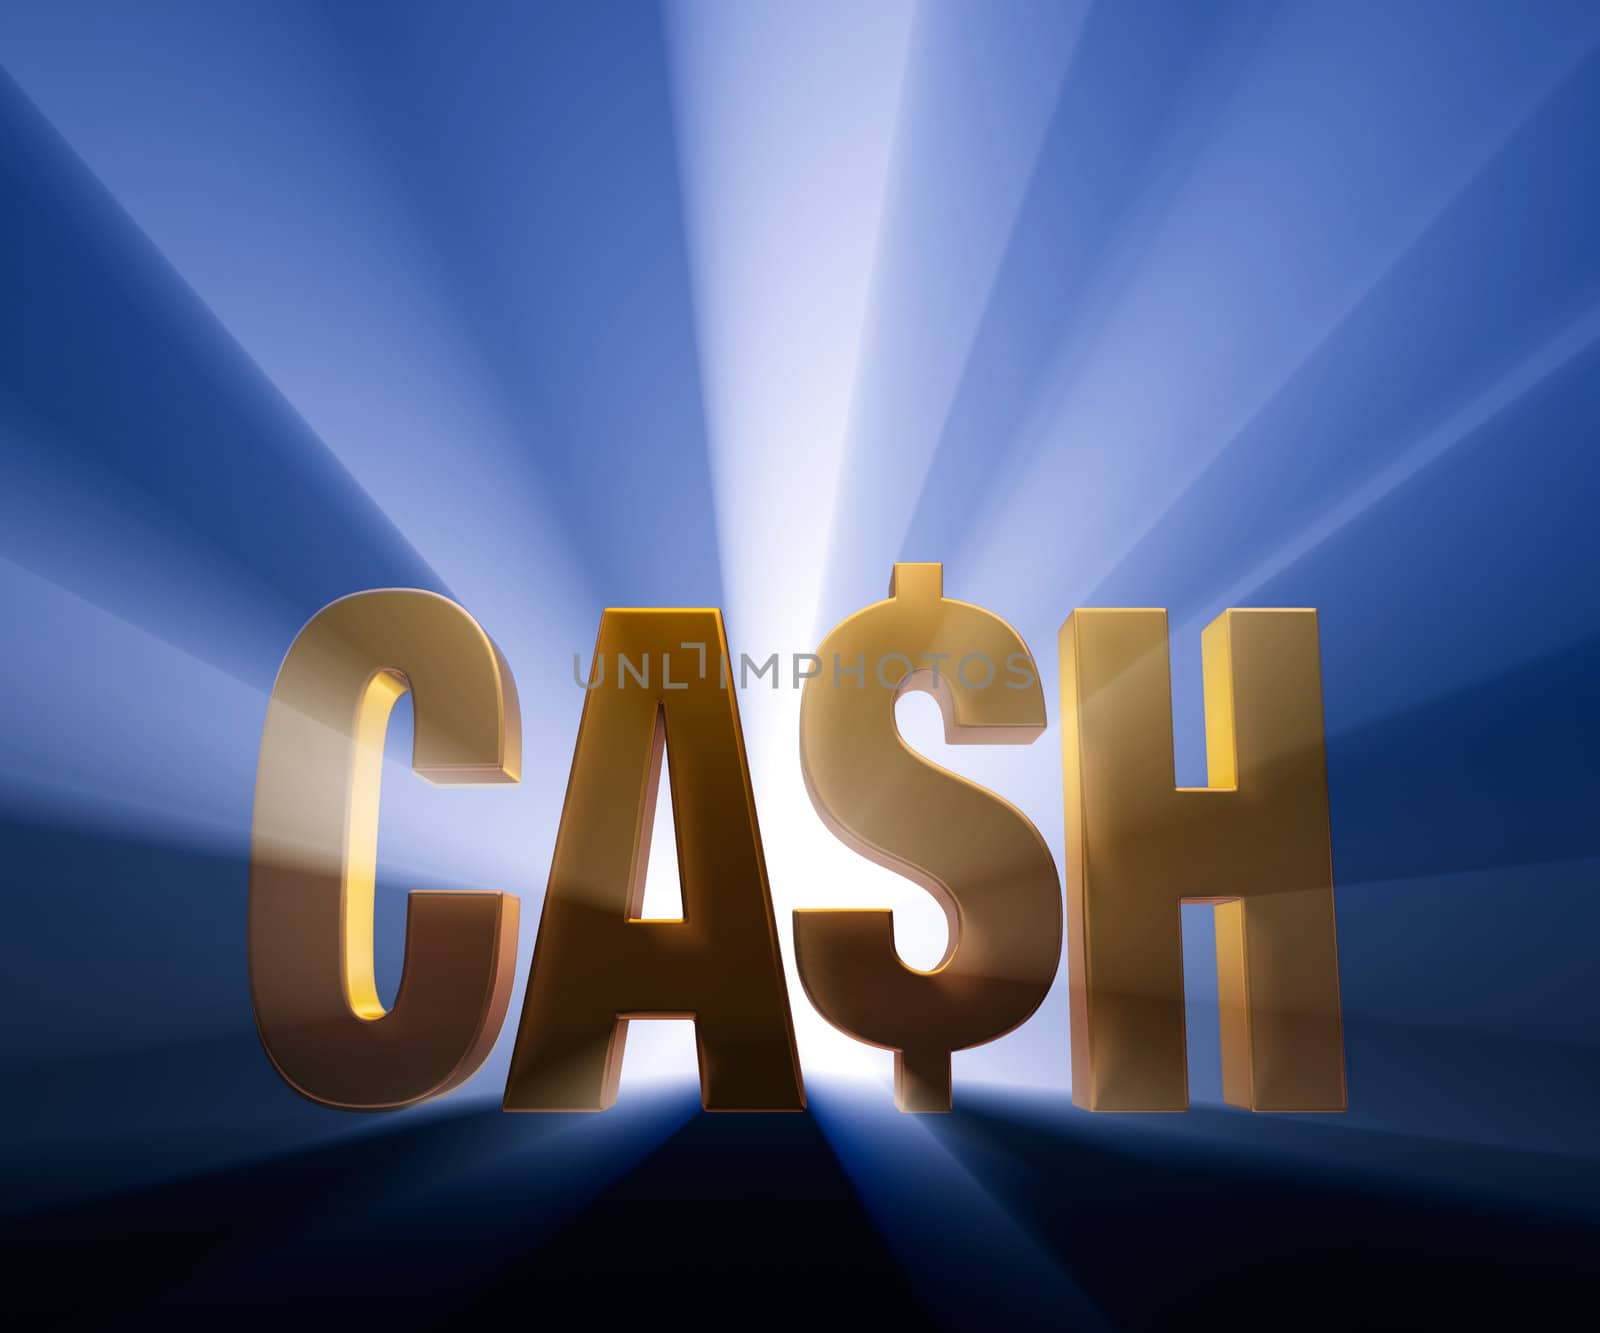 Big, gold "CA$H" on dark blue background and brilliantly backlight with light rays shining through.